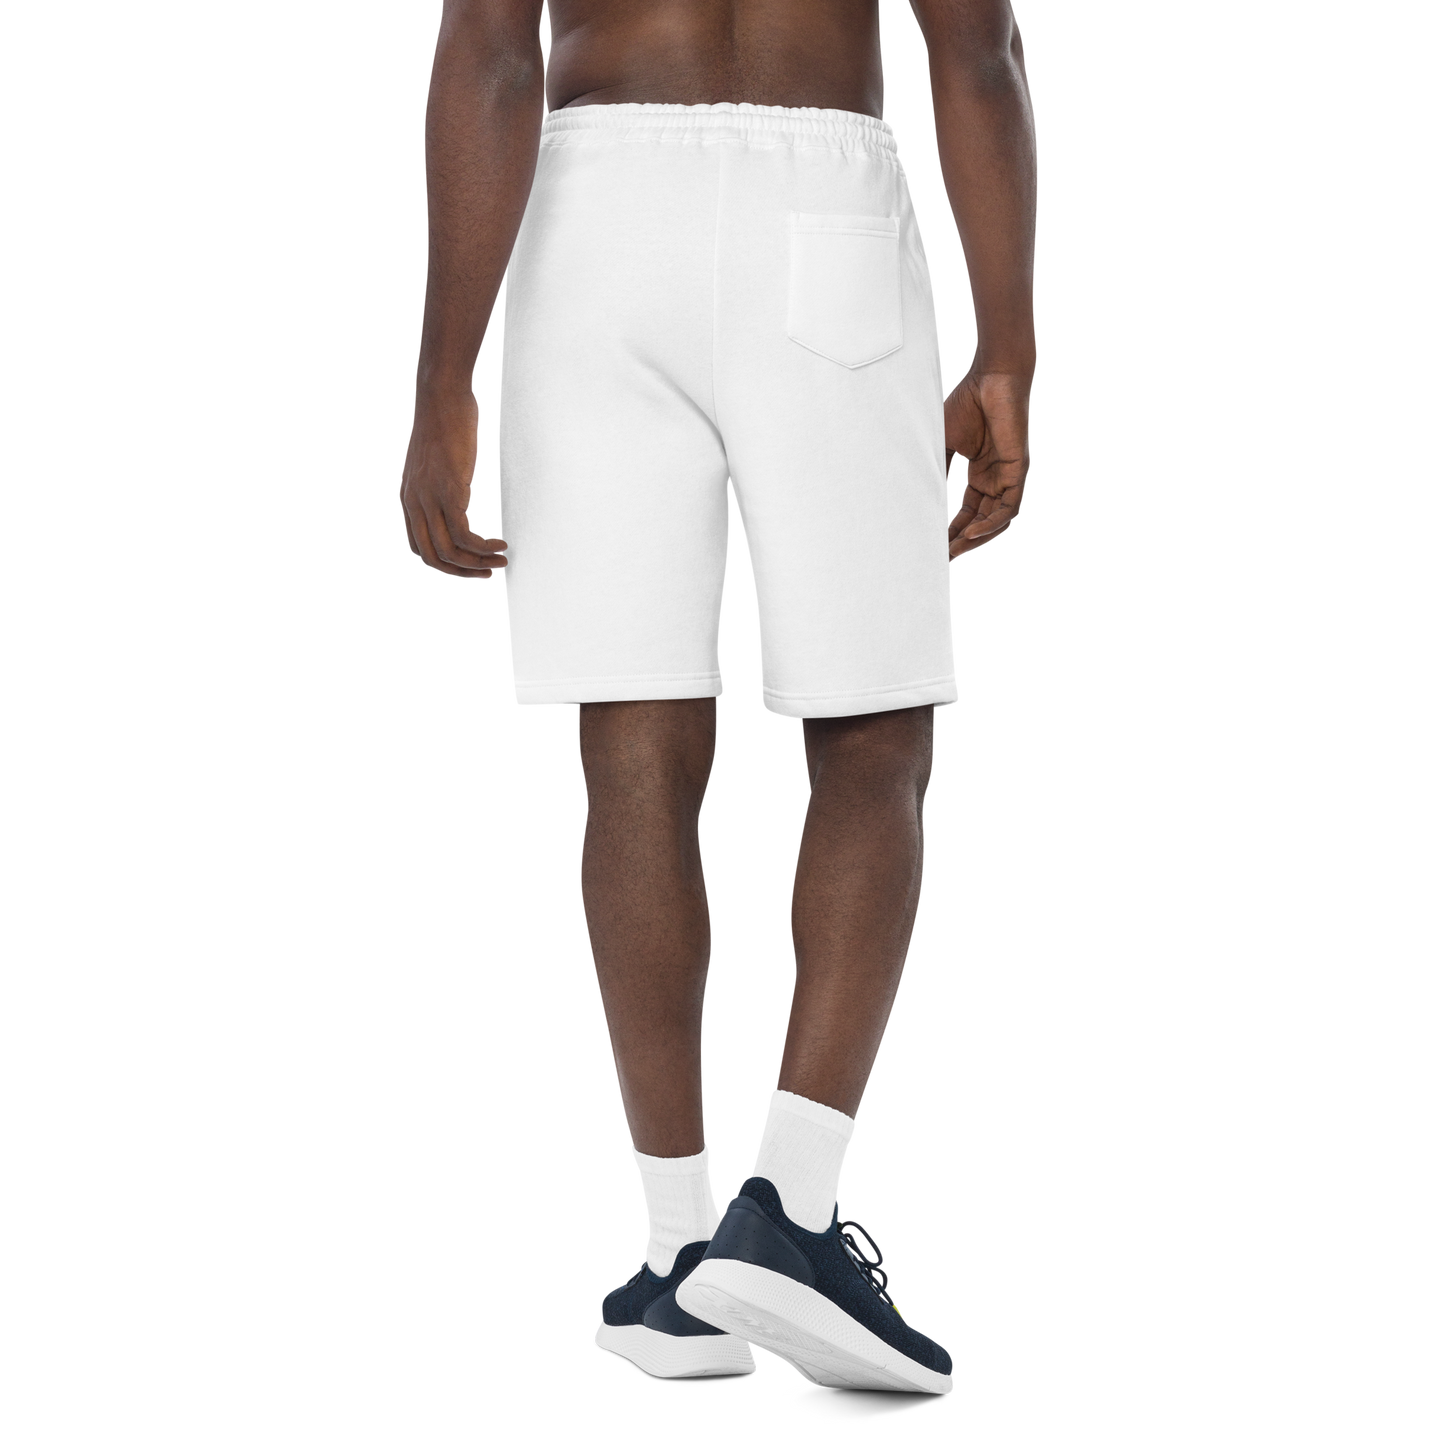 Men's Essential Comfort Shorts: Relaxed Fit, Built-In Flex